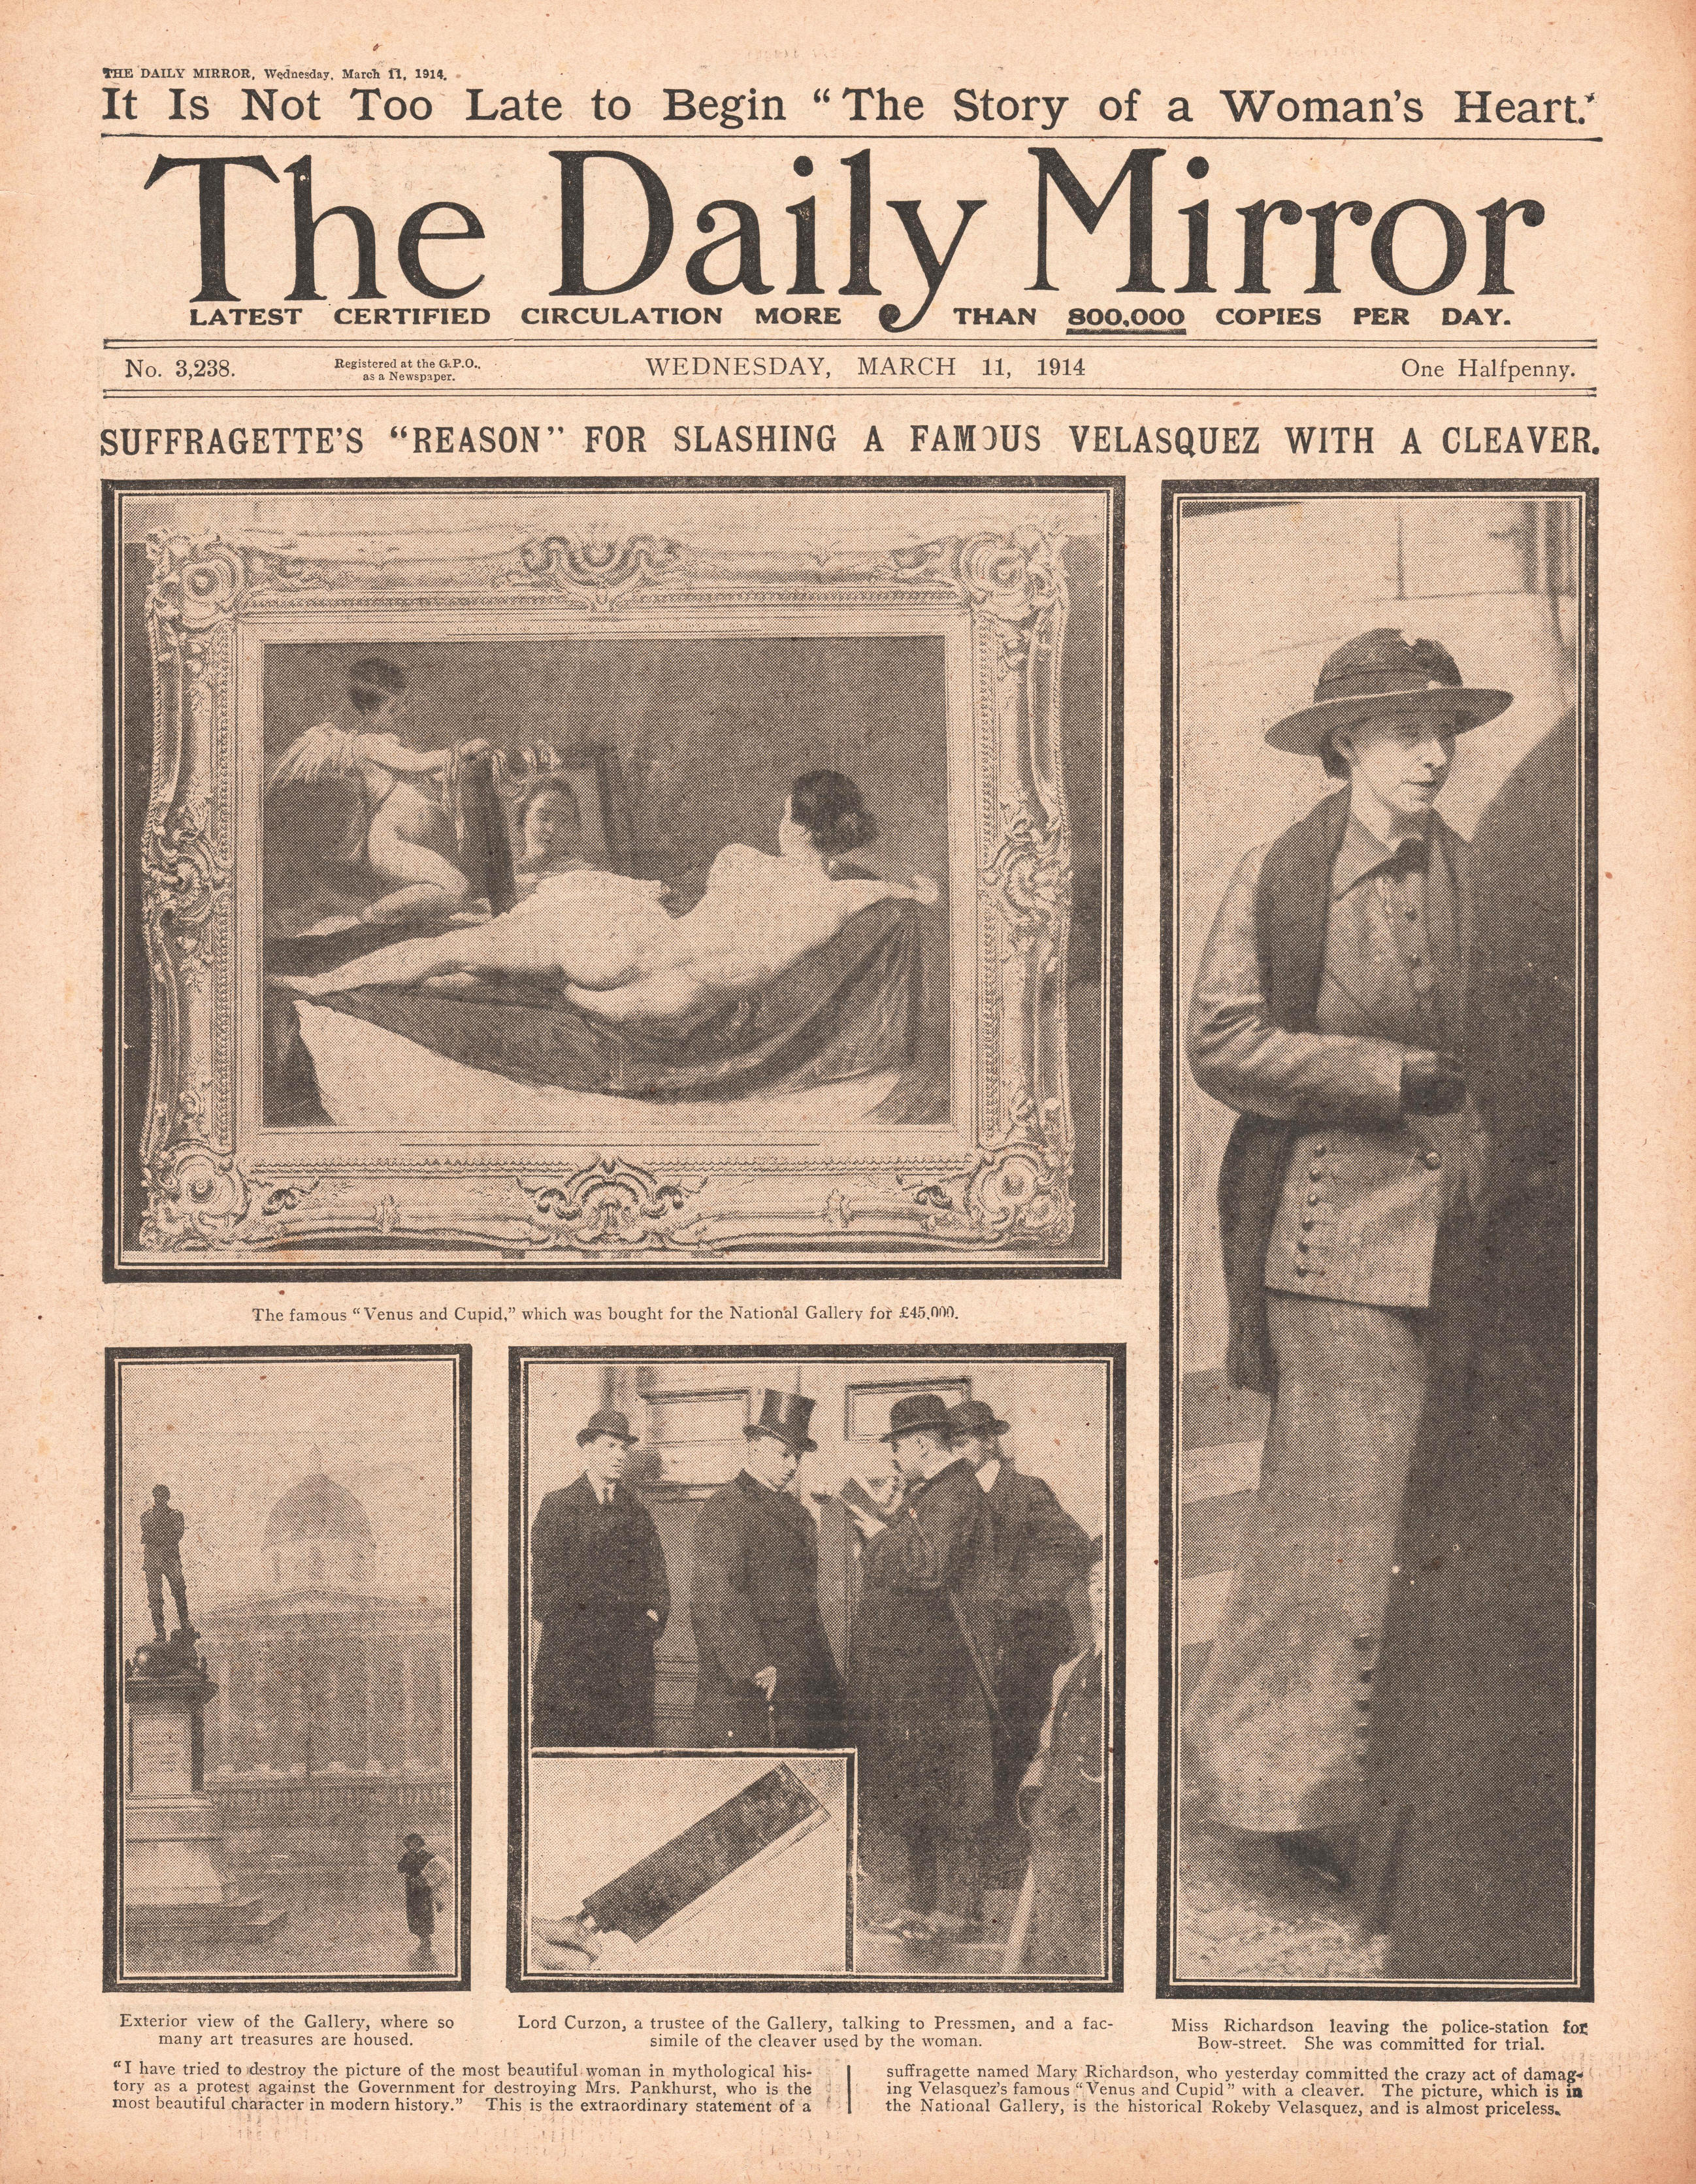 Photograph of the front page of the ‘Daily Mirror, 11 March 1914, reporting Richardson’s attack on ‘Rokeby Venus’